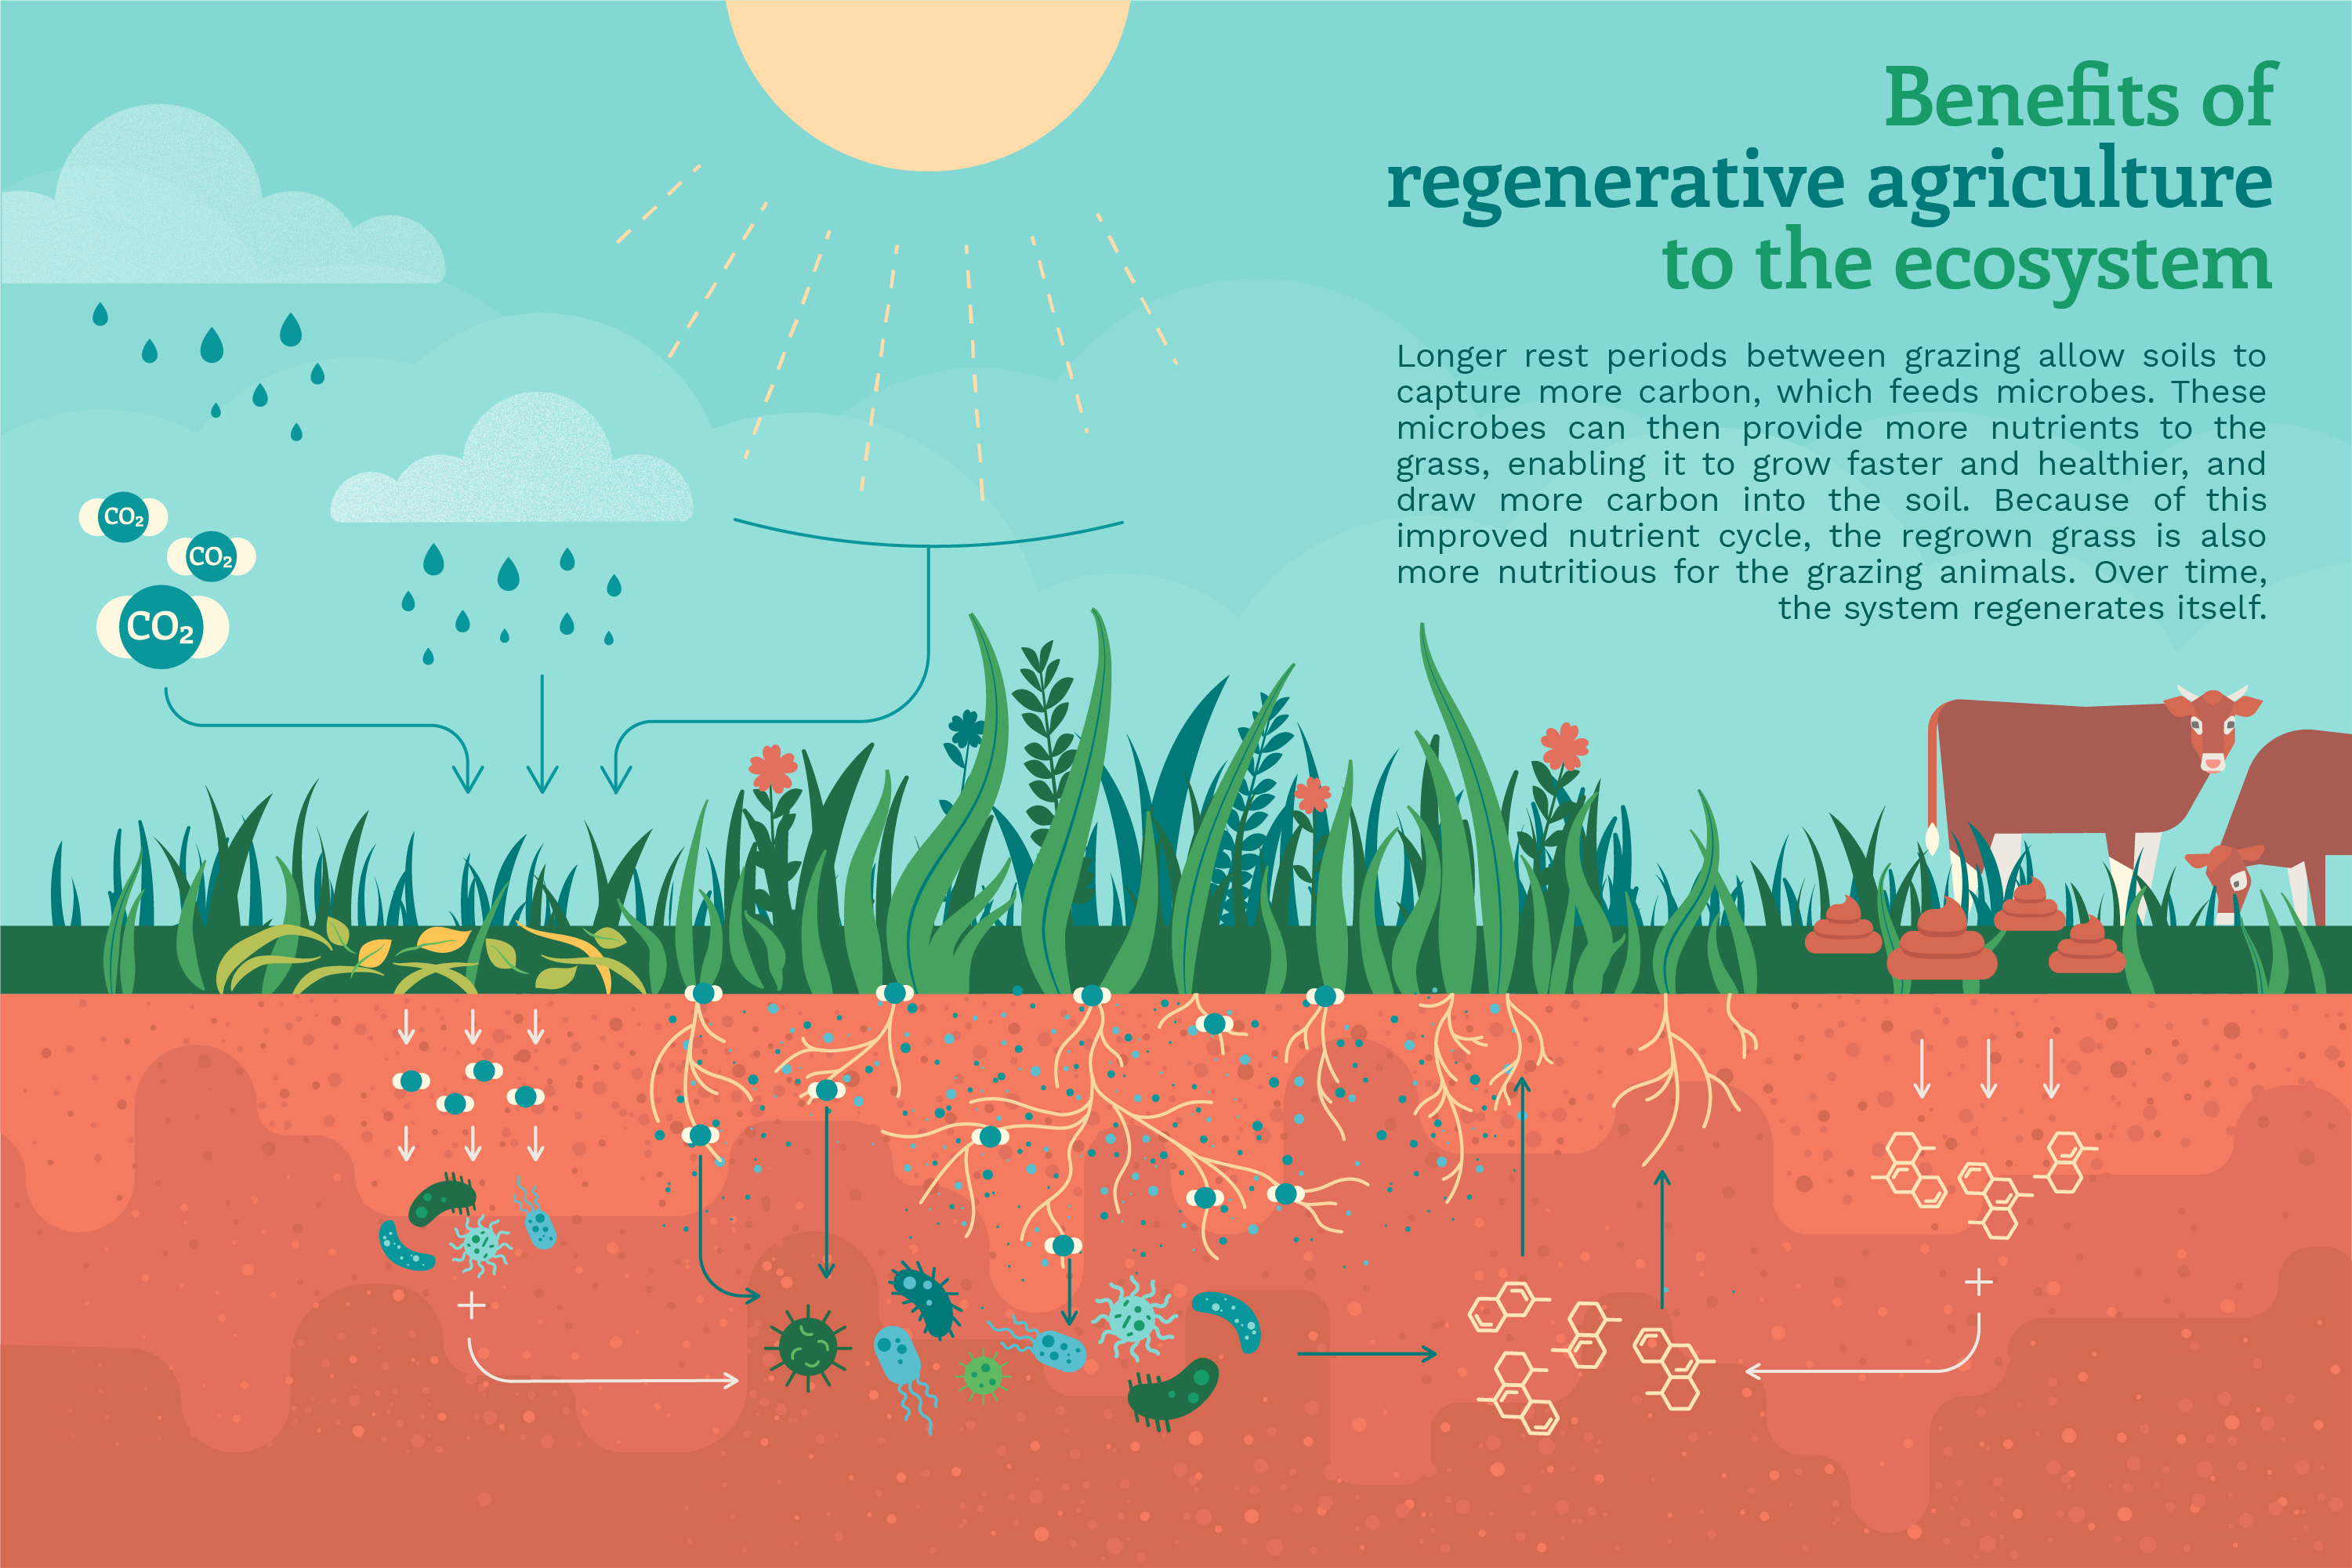 illustration showing the benefits of regenerative agriculture to the ecosystem